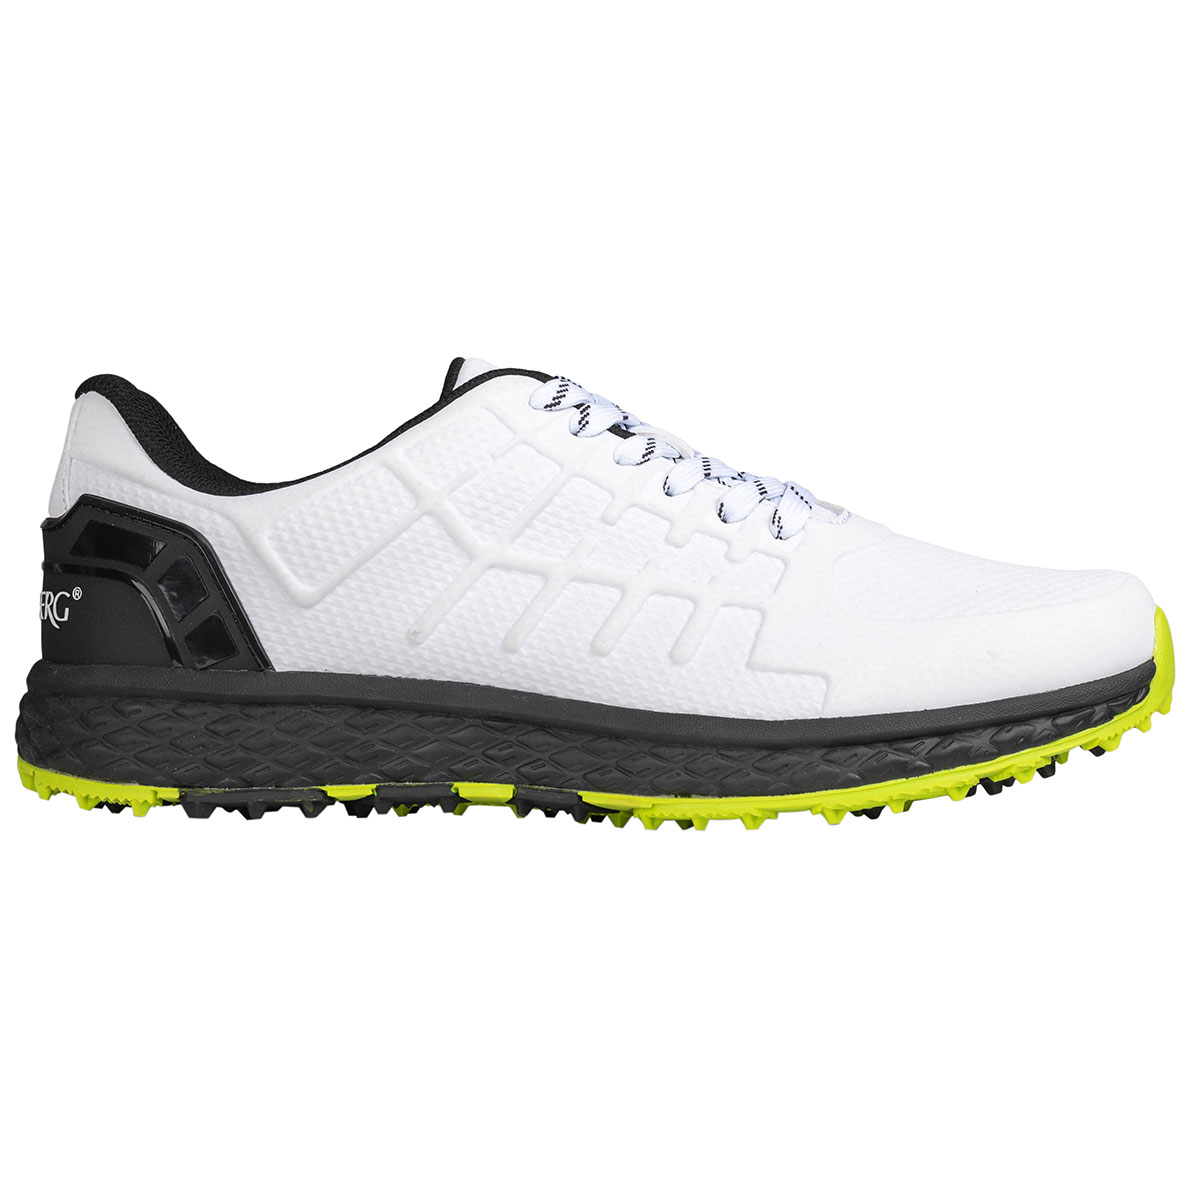 Stromberg Razor Spikeless Shoes from american golf